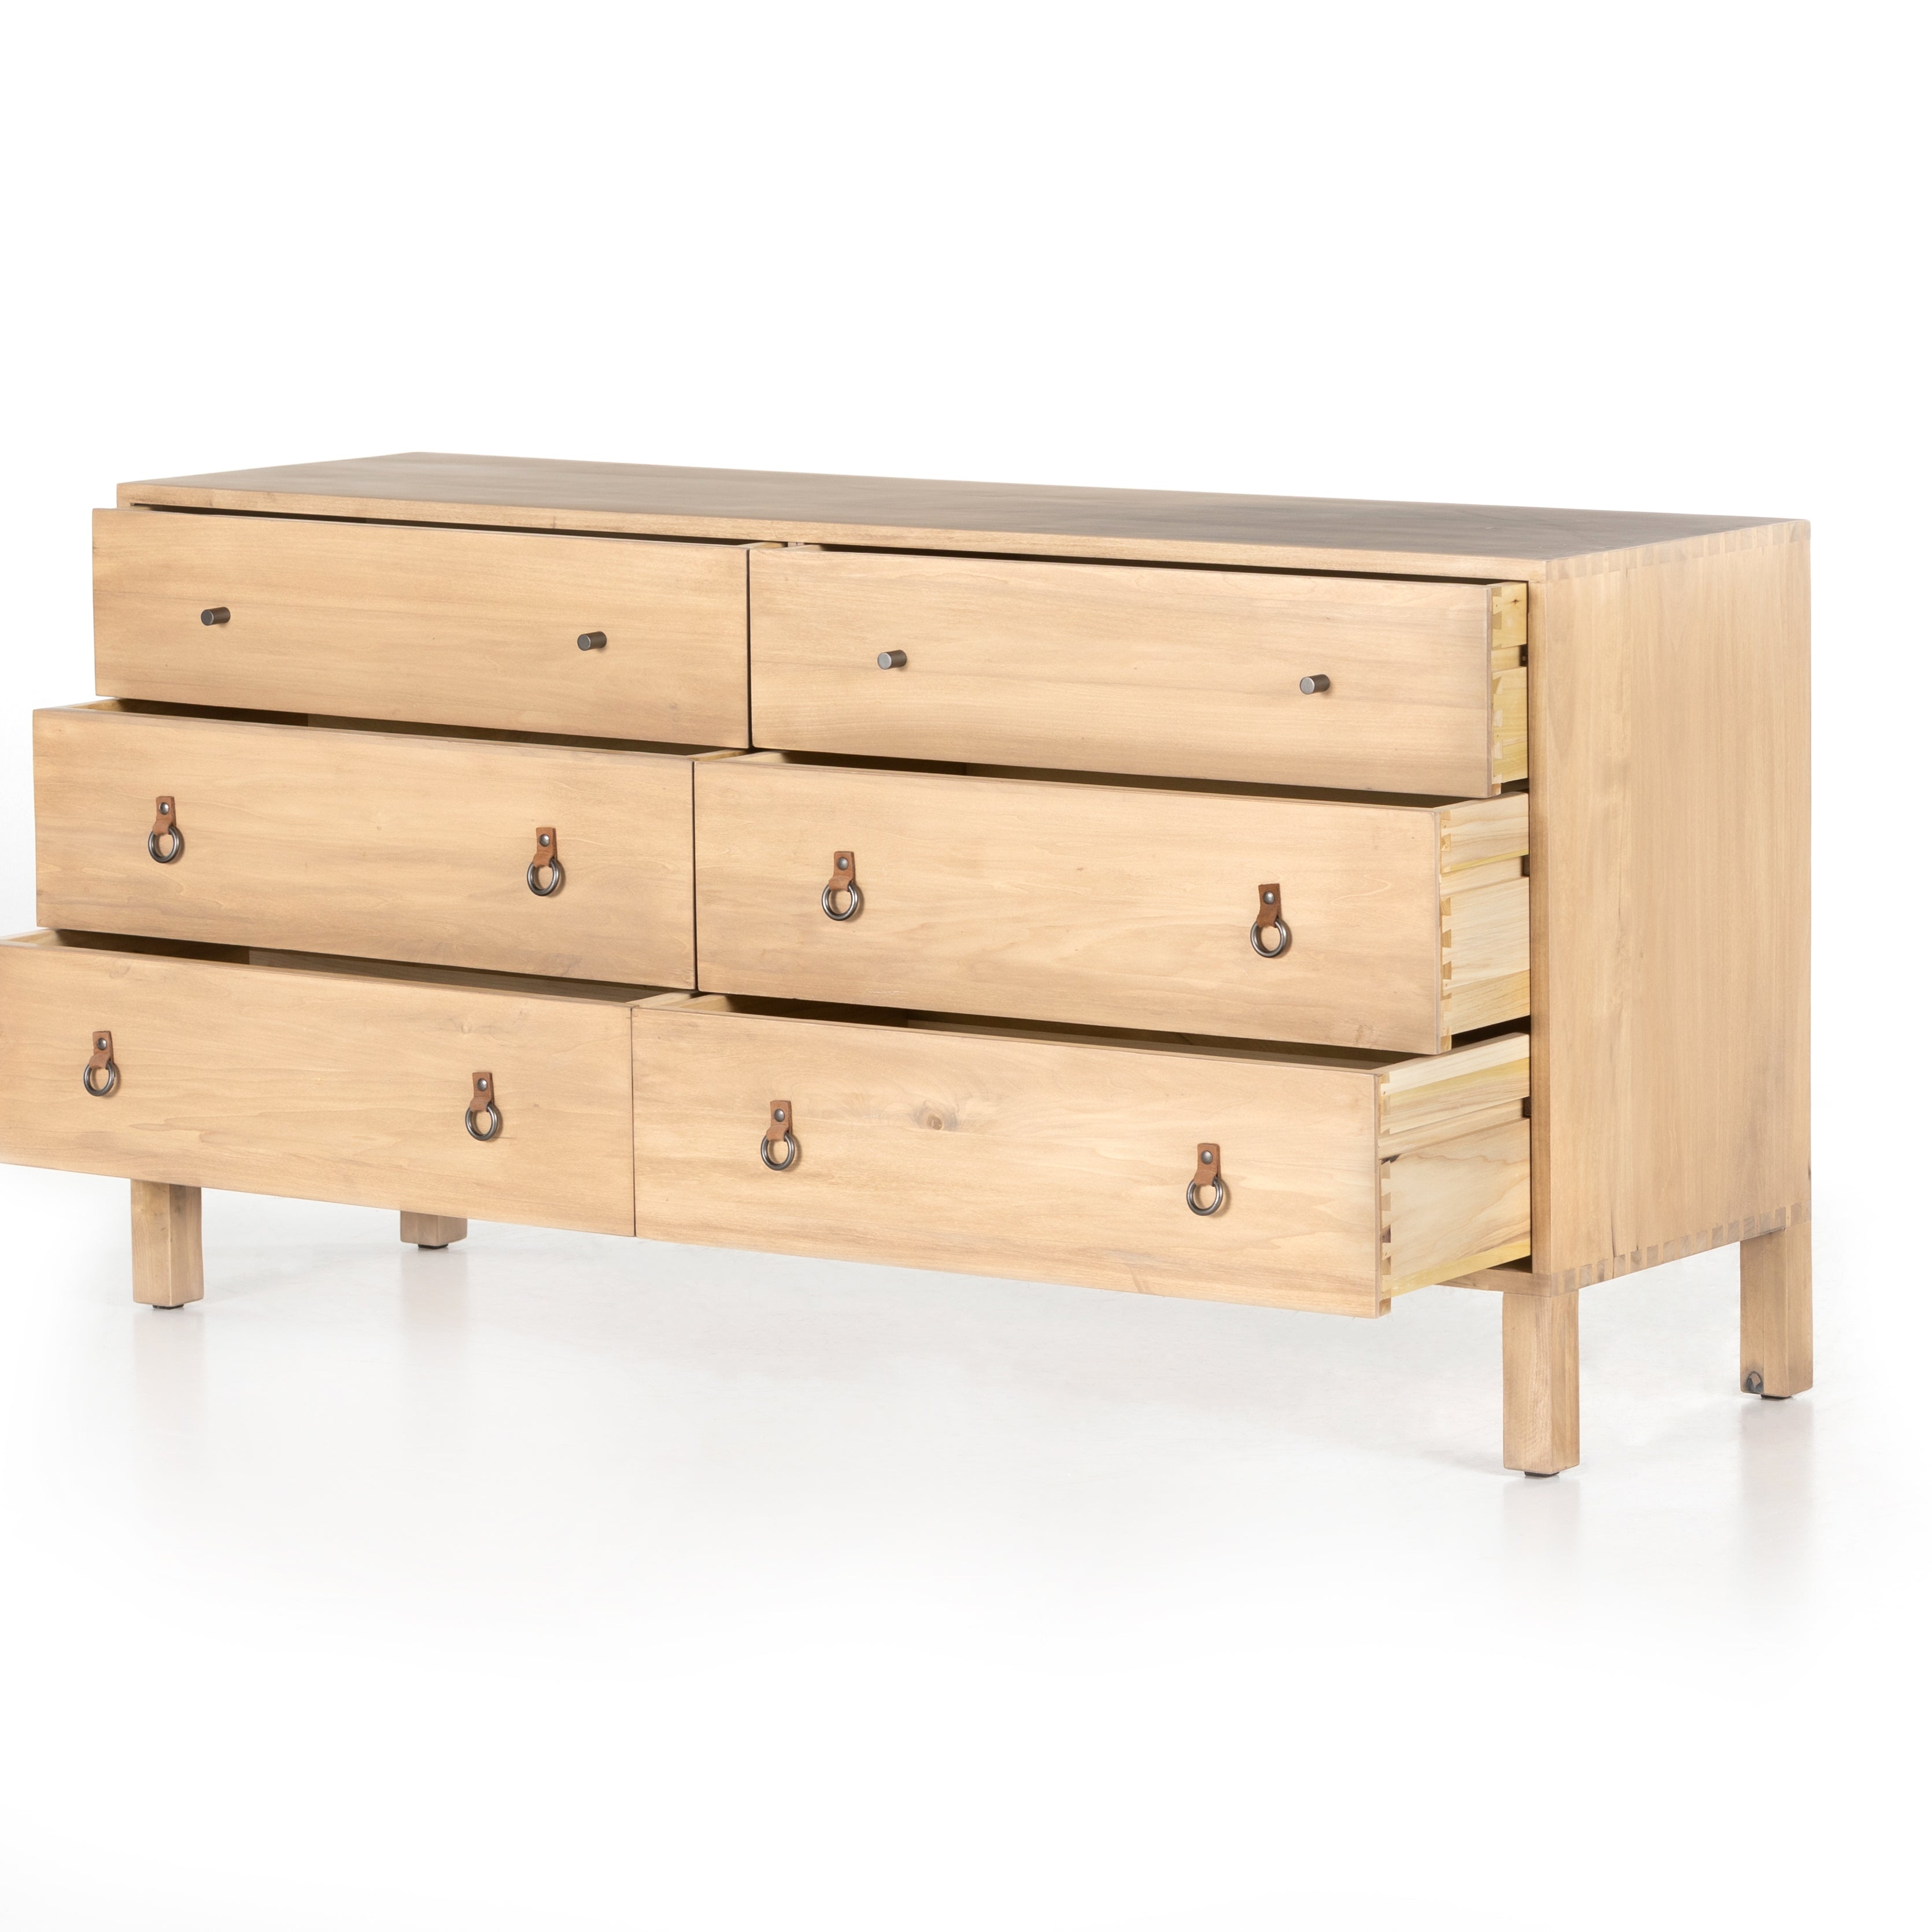 This Isador 6 Drawer Dresser - Dry Wash Poplar is beautifully simple in spirit. Solid dry-washed poplar forms a spacious six-drawer dresser, with dovetail joinery plus iron and leather hardware for a fresh, bright look in any bedroom.   Overall Dimensions: 65.00"w x 19.00"d x 32.25"h